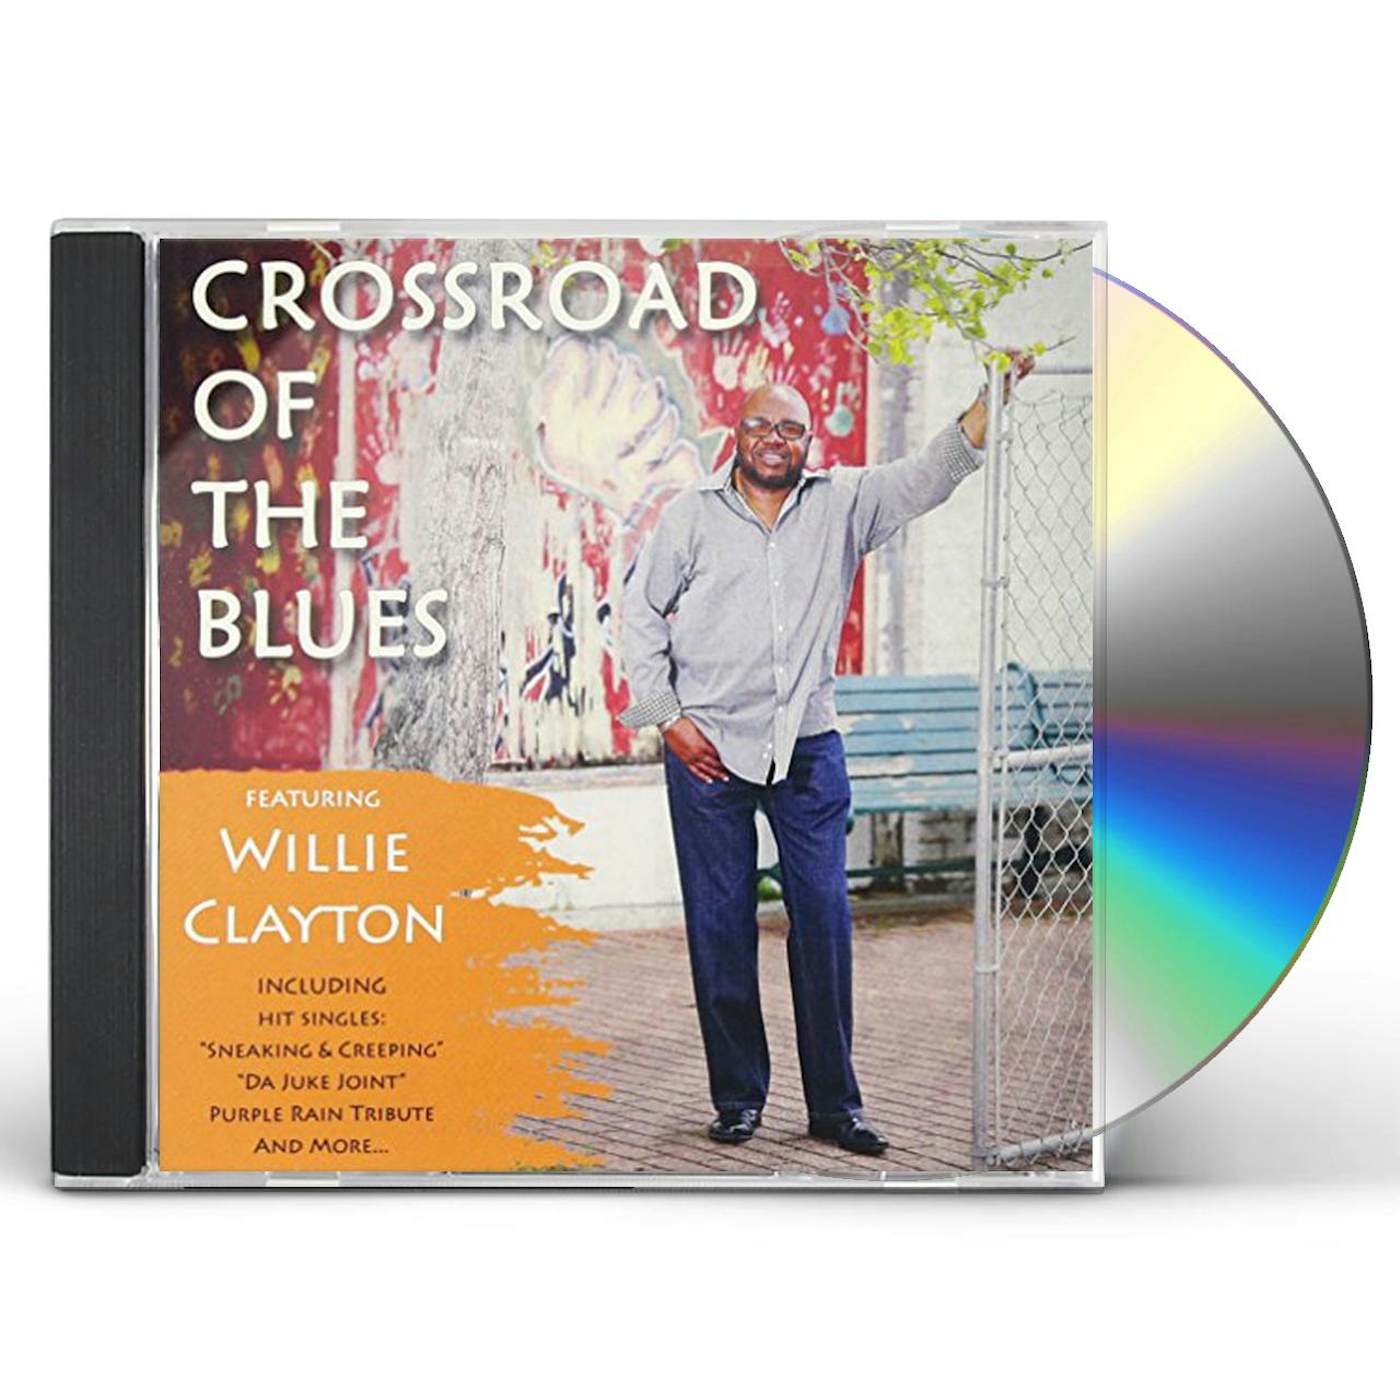 Willie Clayton CROSSROAD OF THE BLUES CD